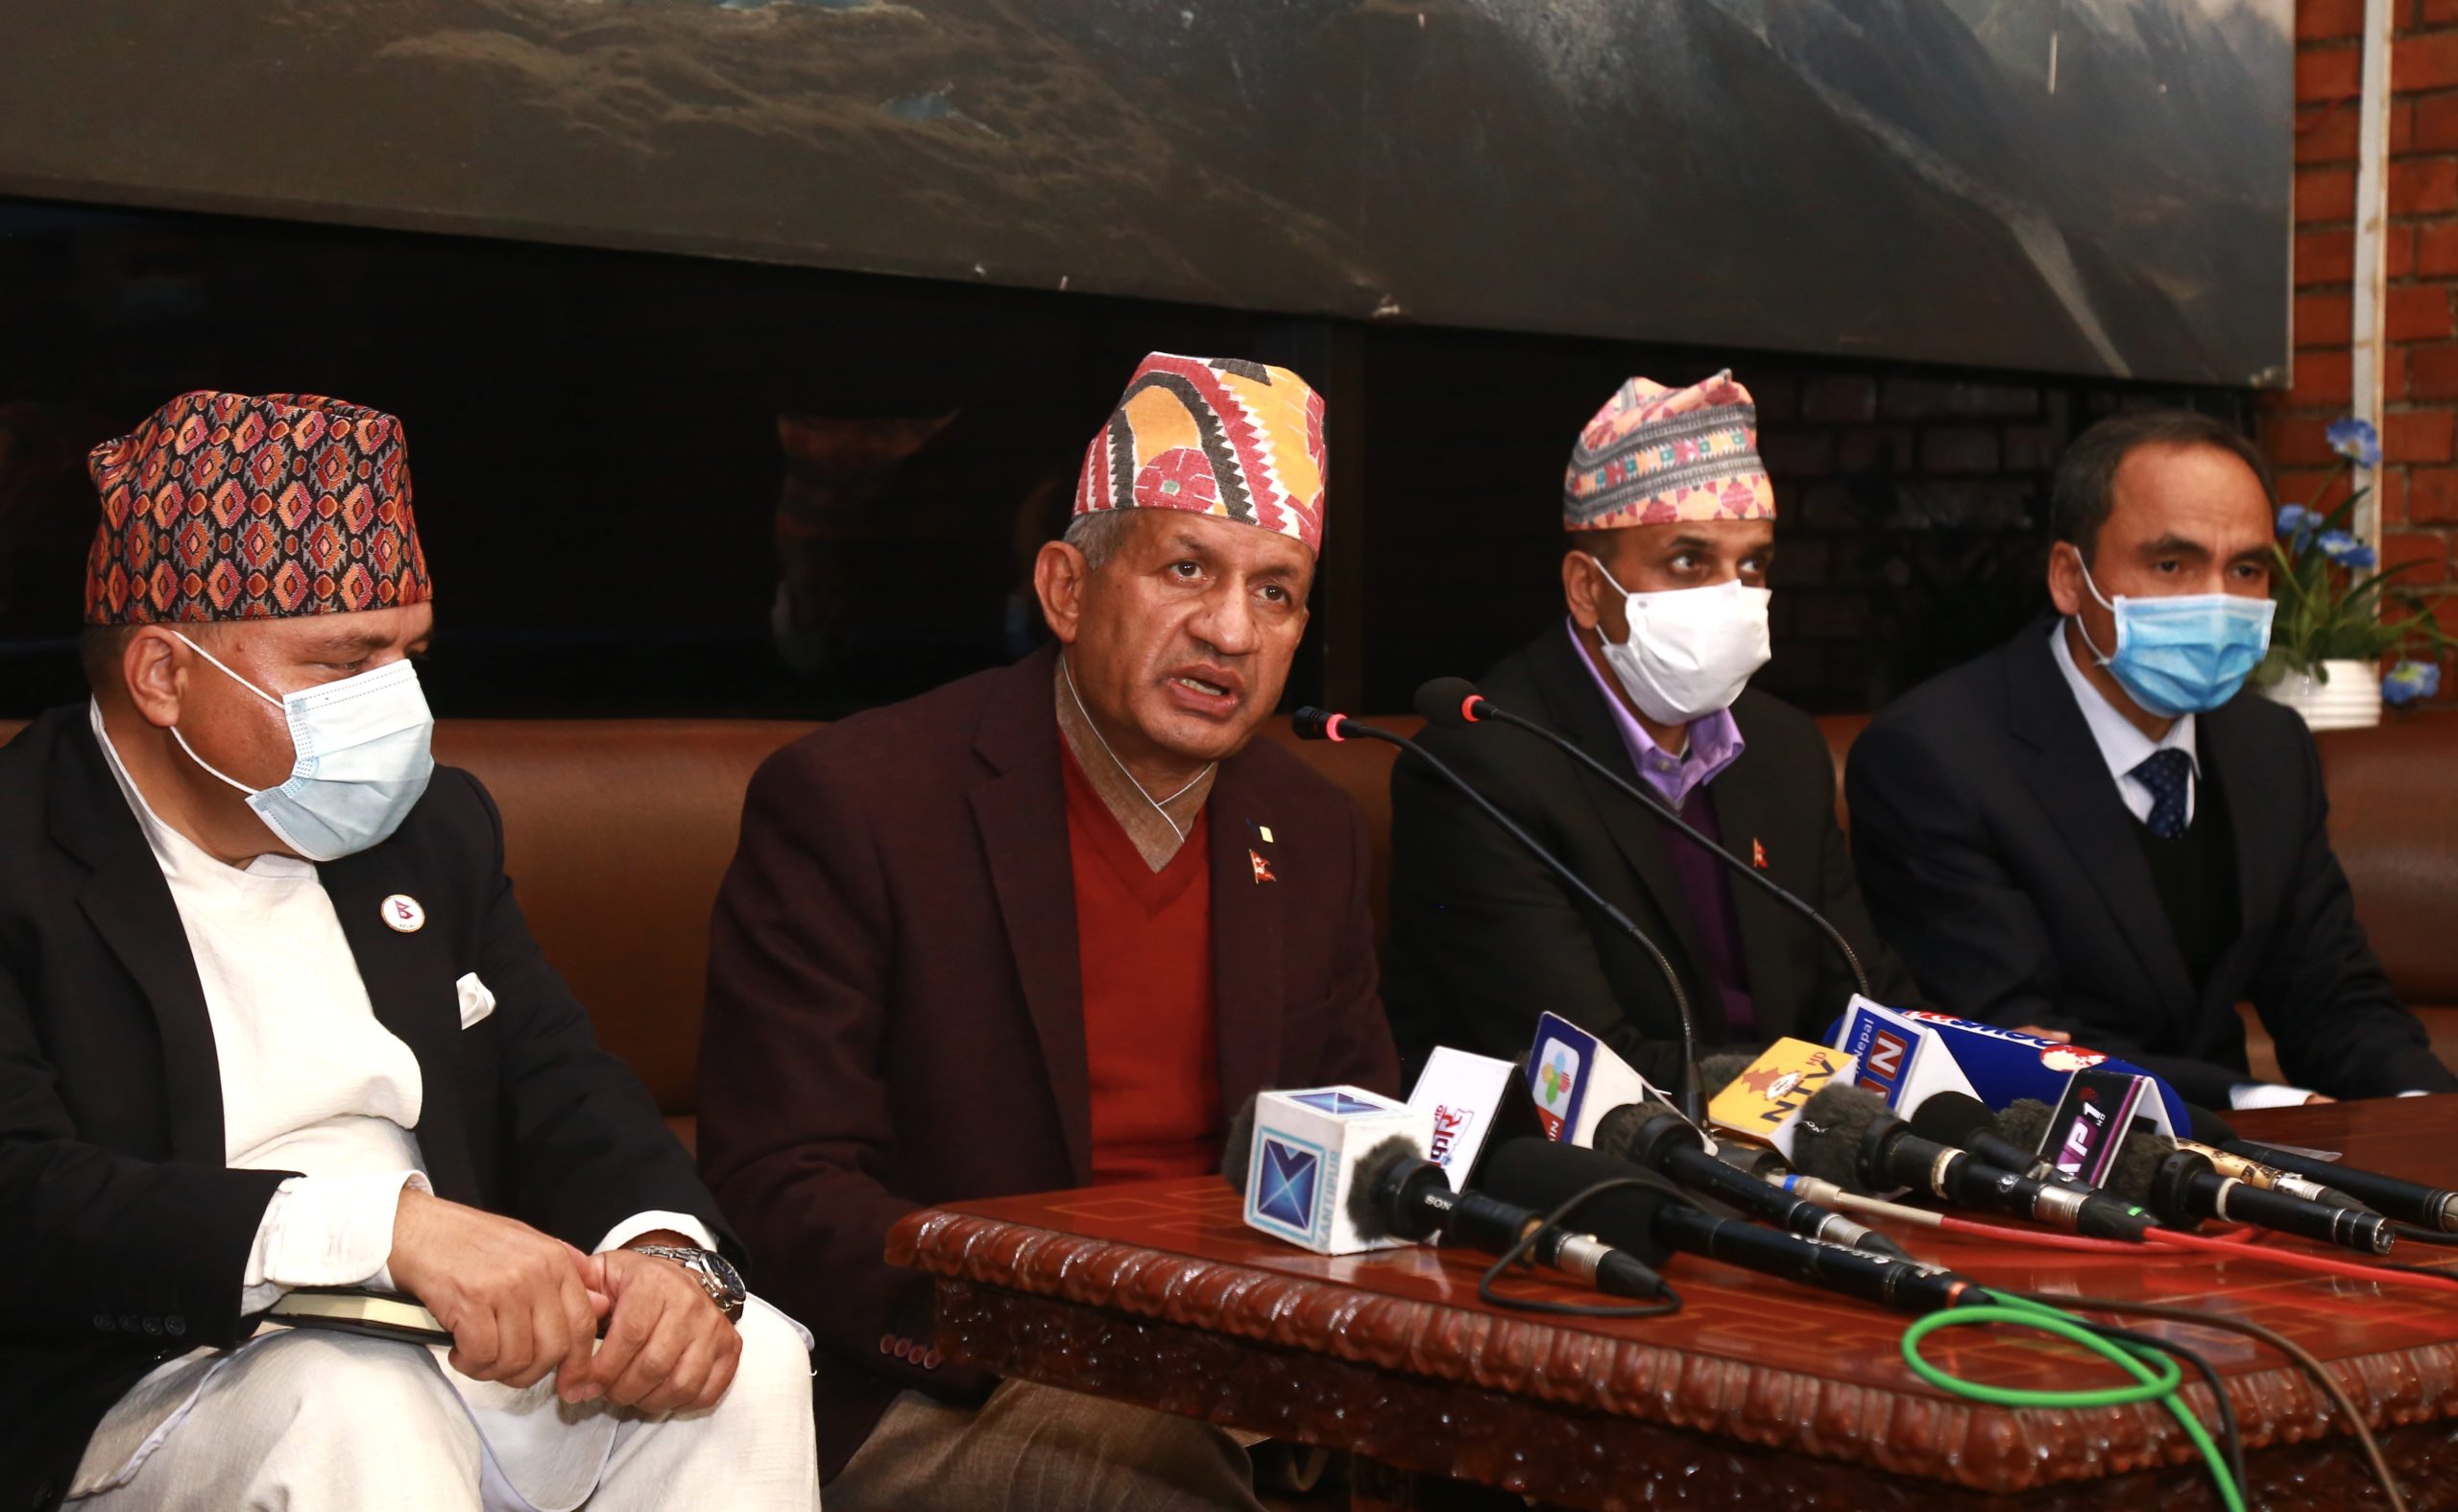 Foreign Minister Gyawali back home, says Joint Commission meeting concluded cordially